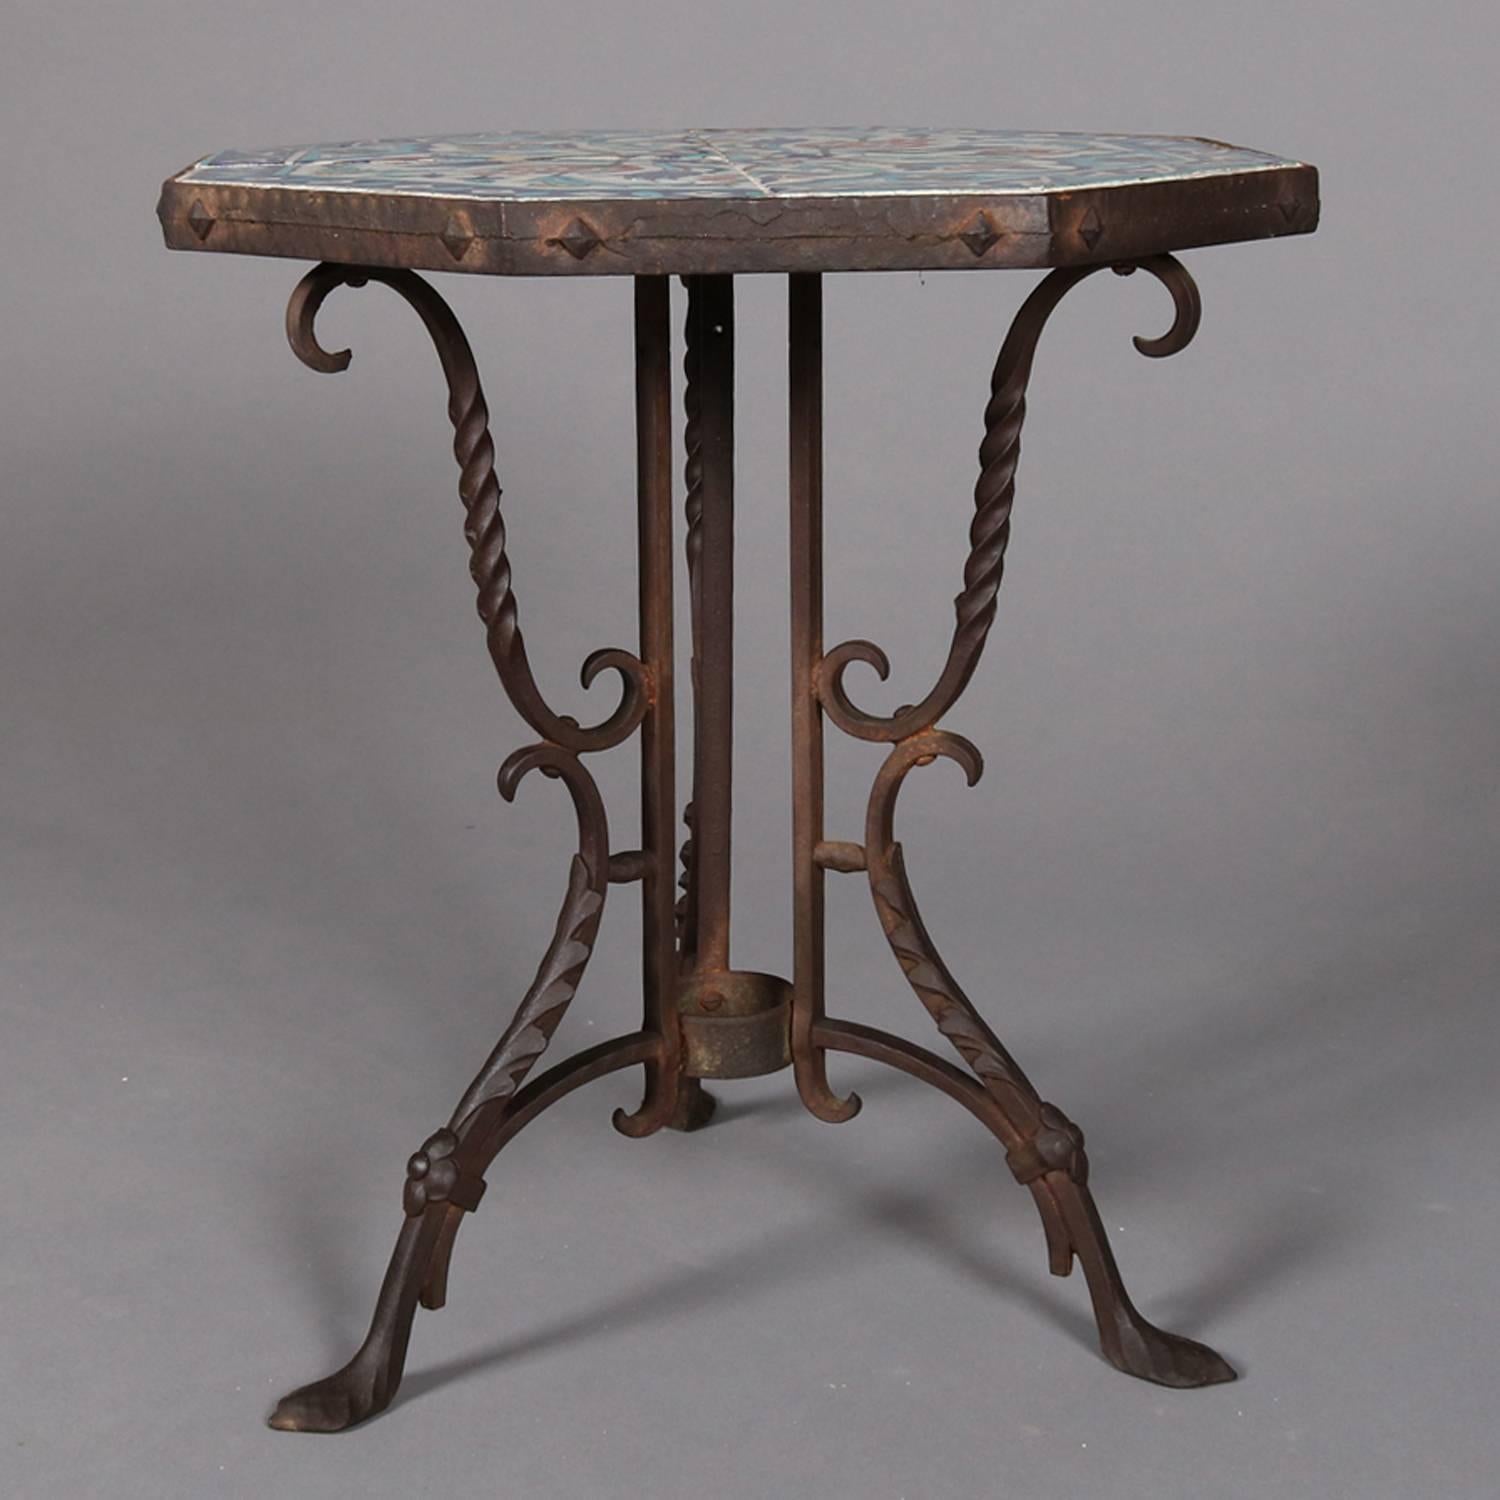 California Yellin School plant stand features wrought iron base with tripod twist foliate and scroll form legs supporting octagonal mosaic tile top with urn and floral decoration primarily in blues and seated on snake head form feet, circa